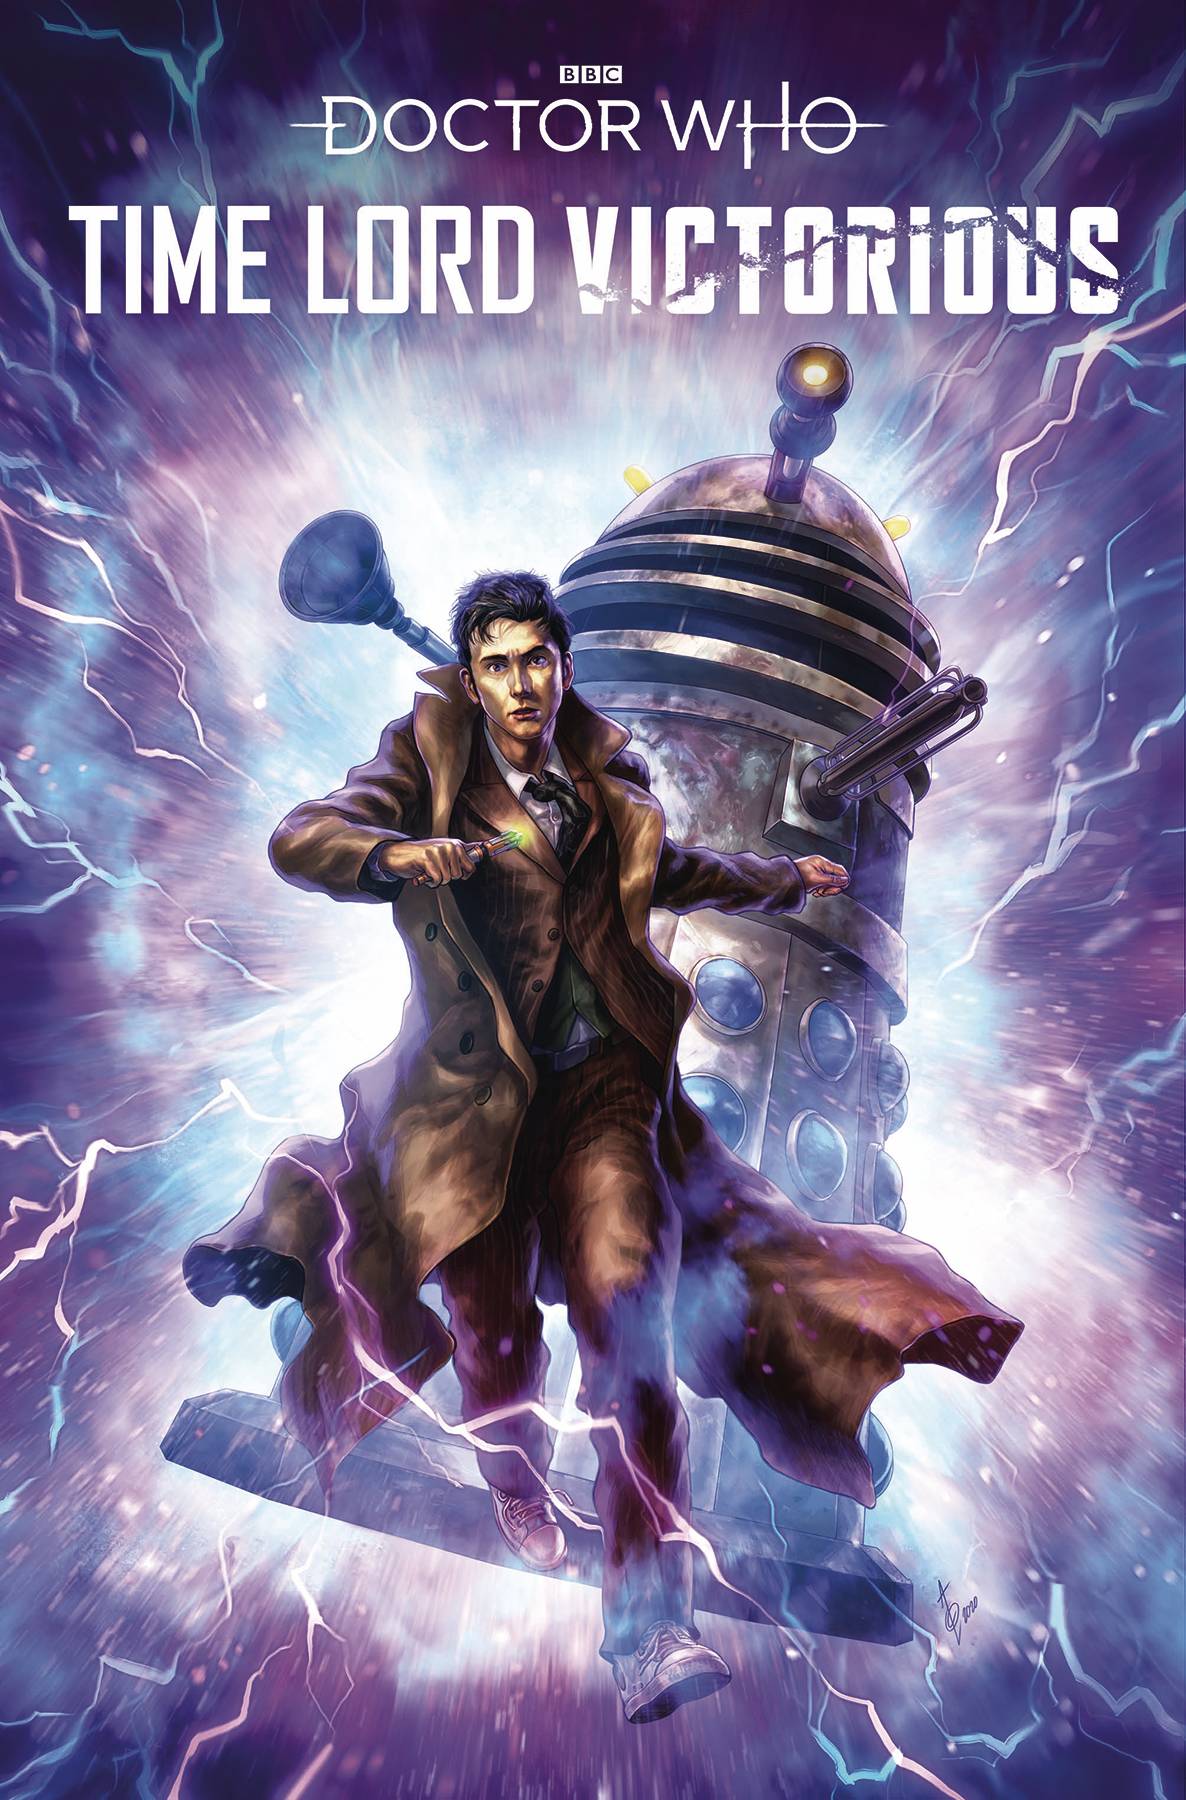 DOCTOR WHO TIME LORD VICTORIOUS #2 CVR C QUAH